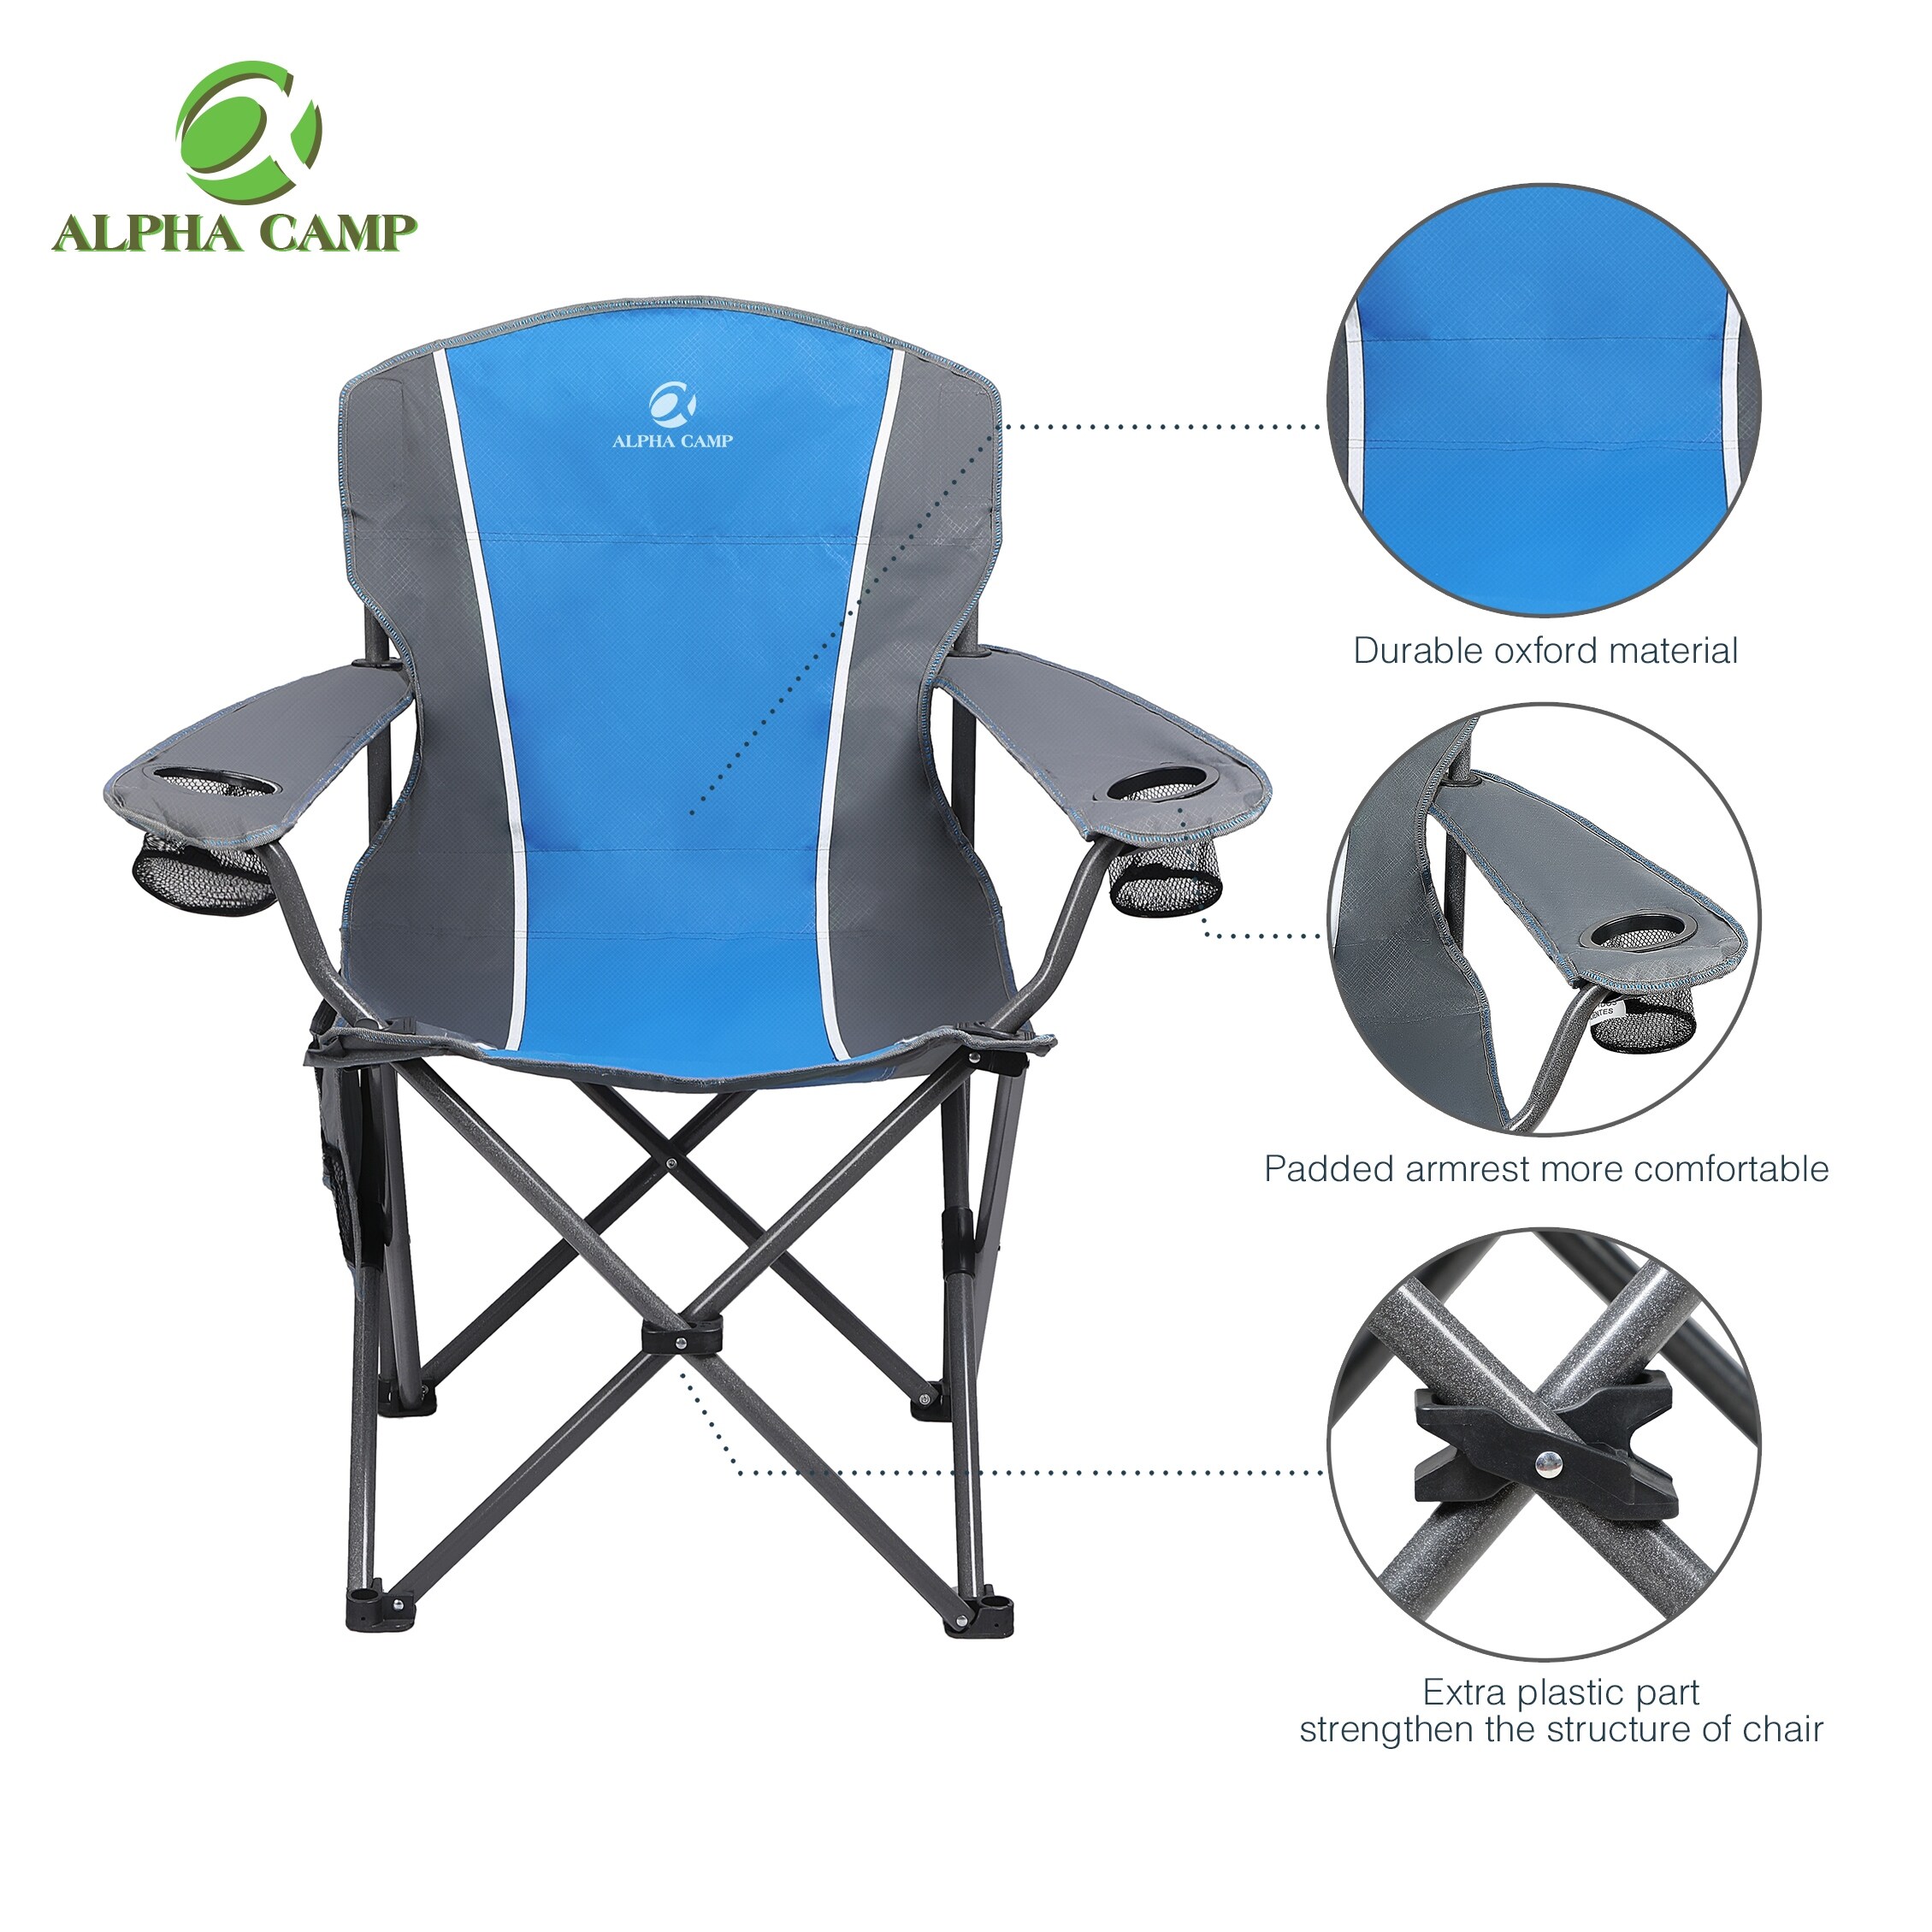 Details about   Oversized Folding Chair Big & Tall Heavy Duty Steel ALPHA CAMP Camping 350 LB 